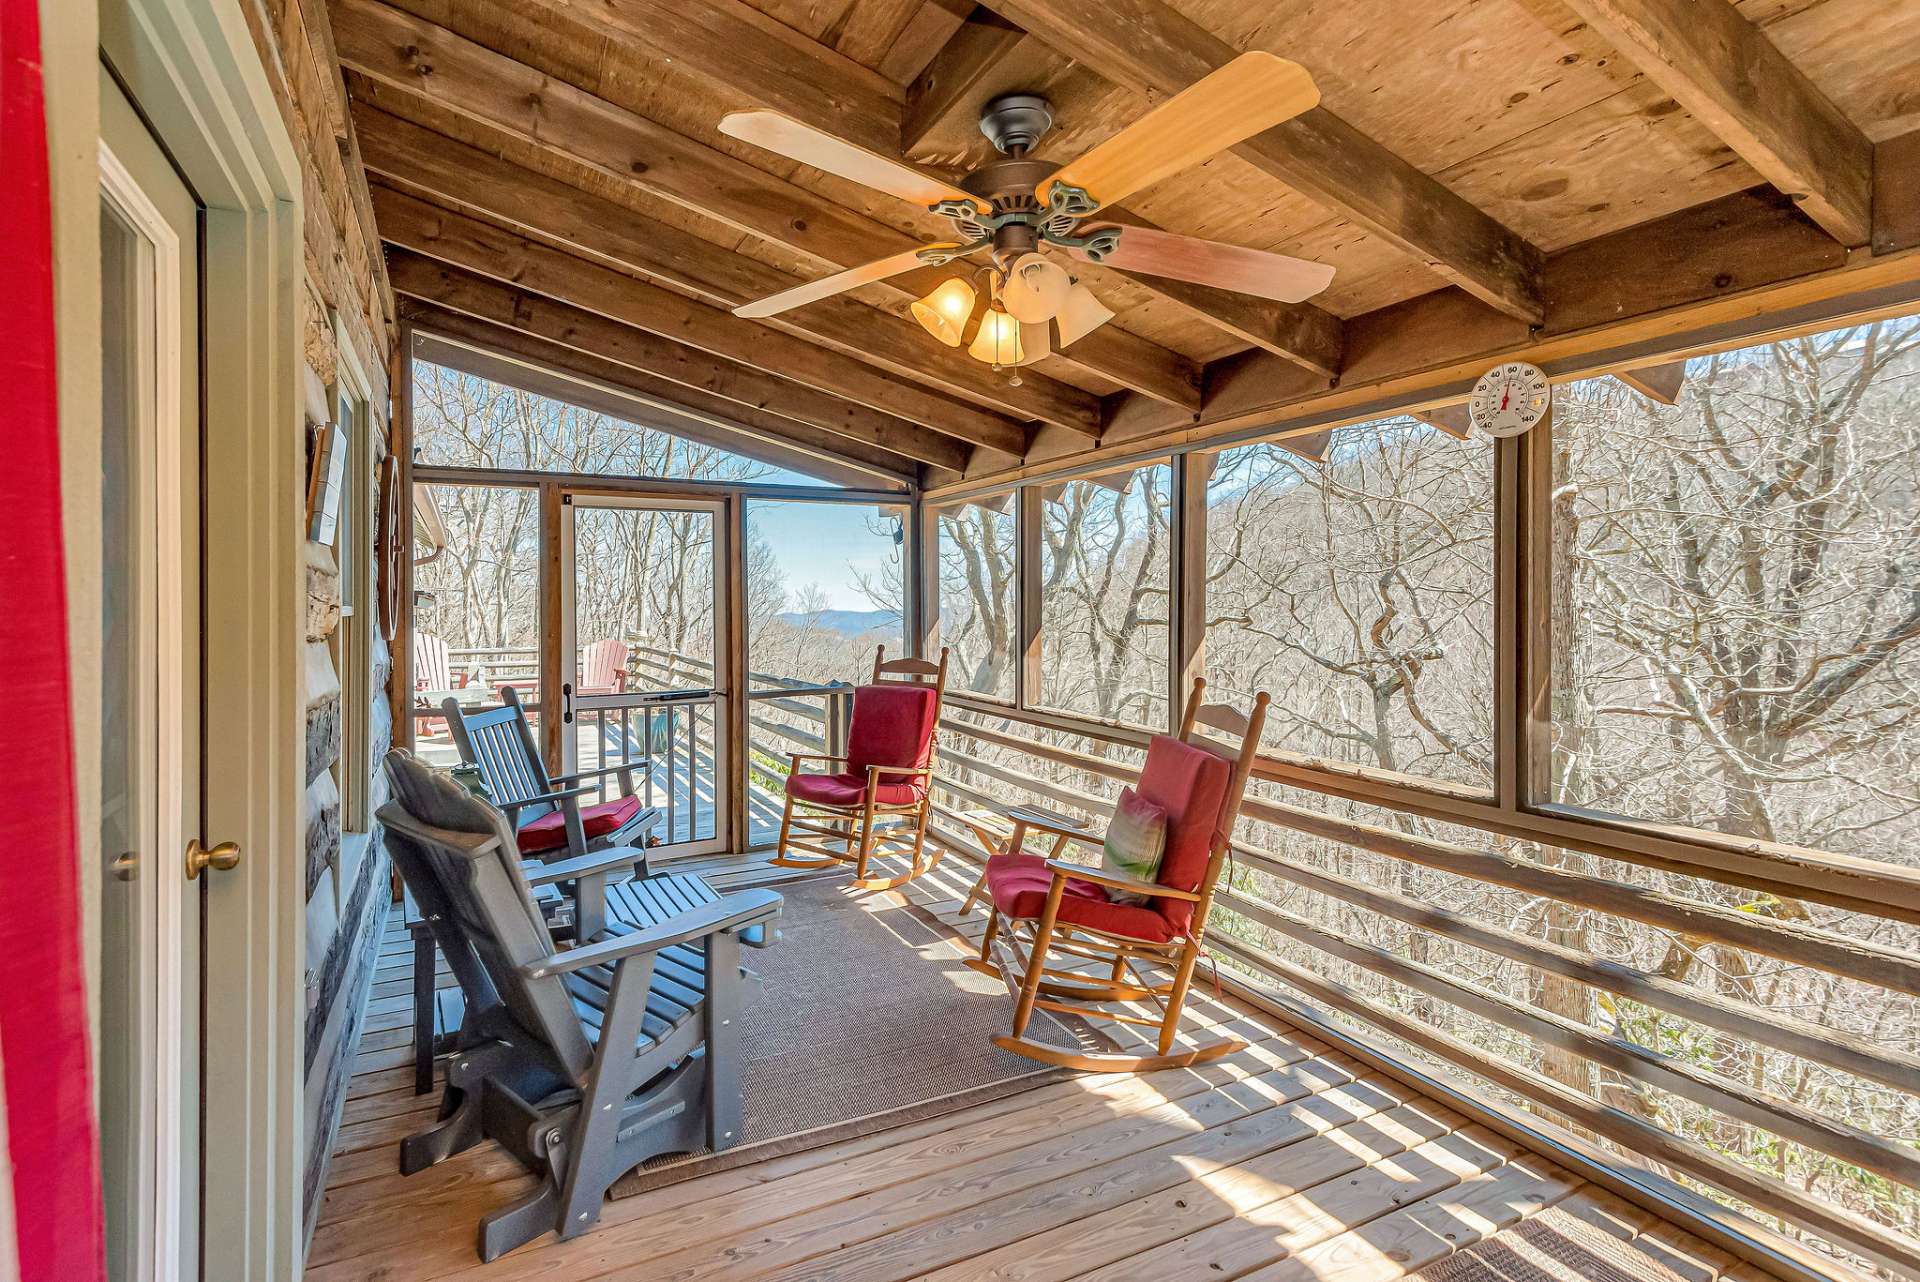 Stay cool, relax, and breathe in the fresh air under the covered porch.